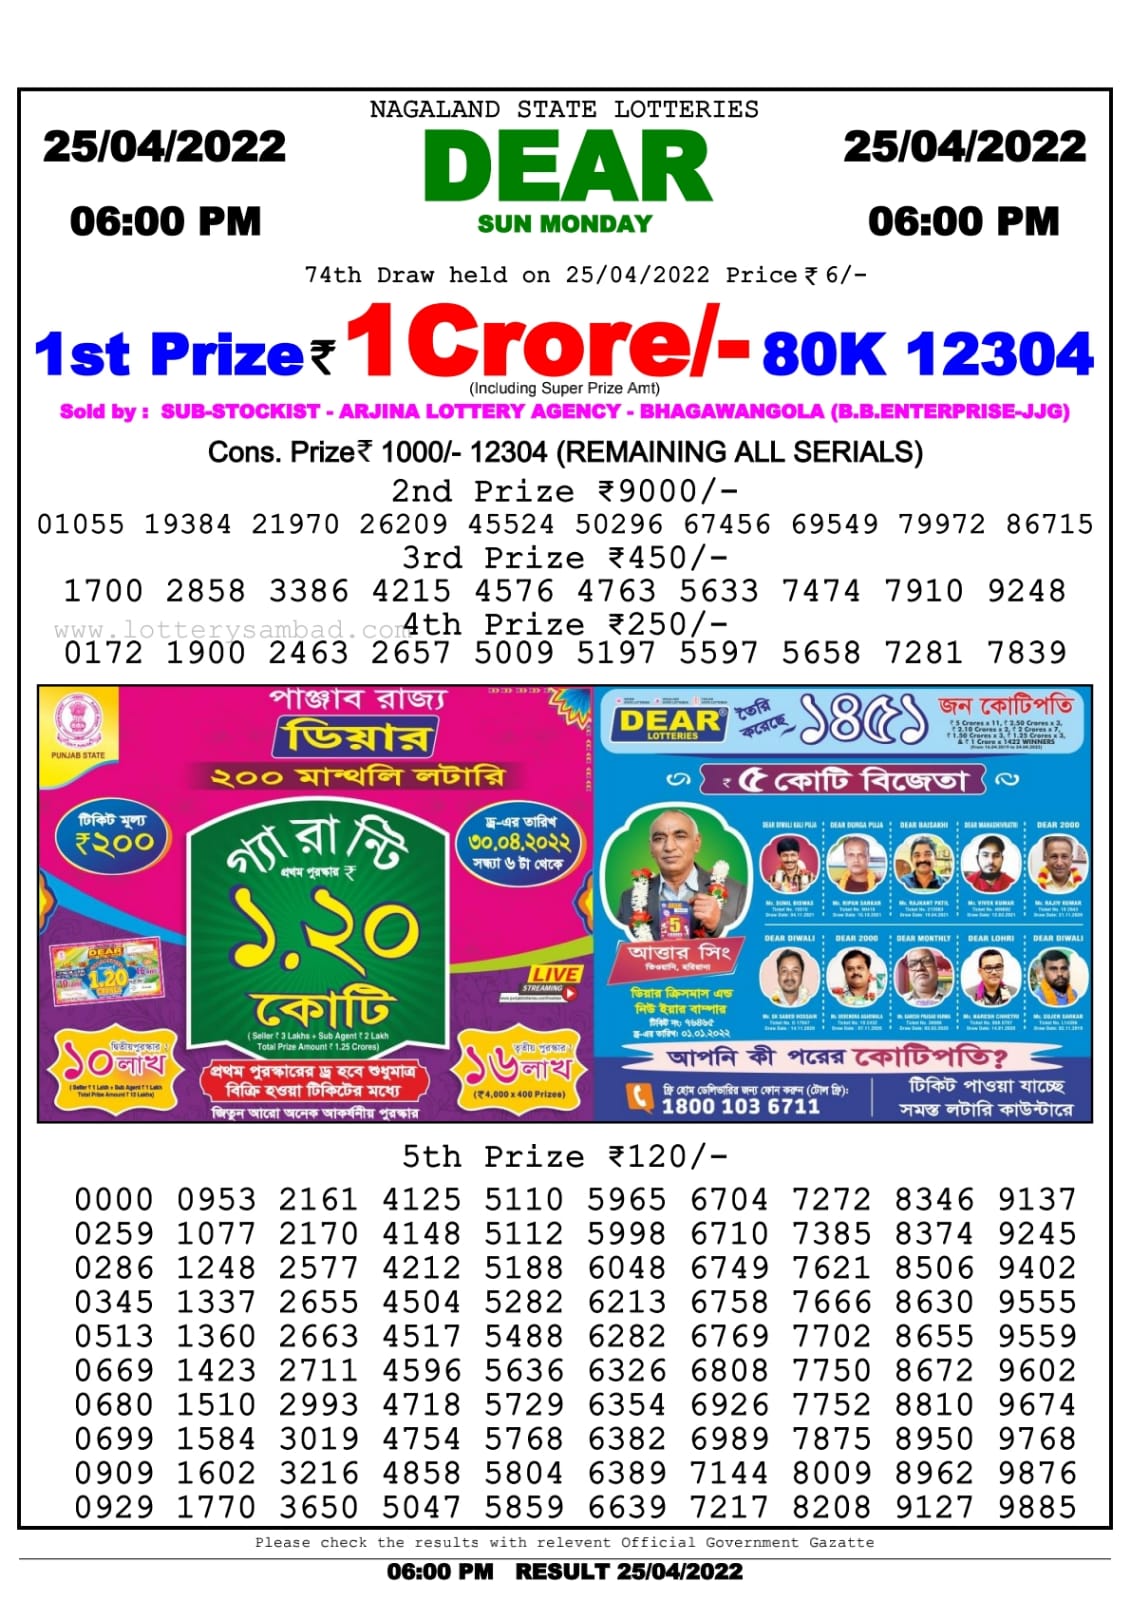 Dear Lottery Nagaland state Lottery Results 08.00 pm 23.04.2022